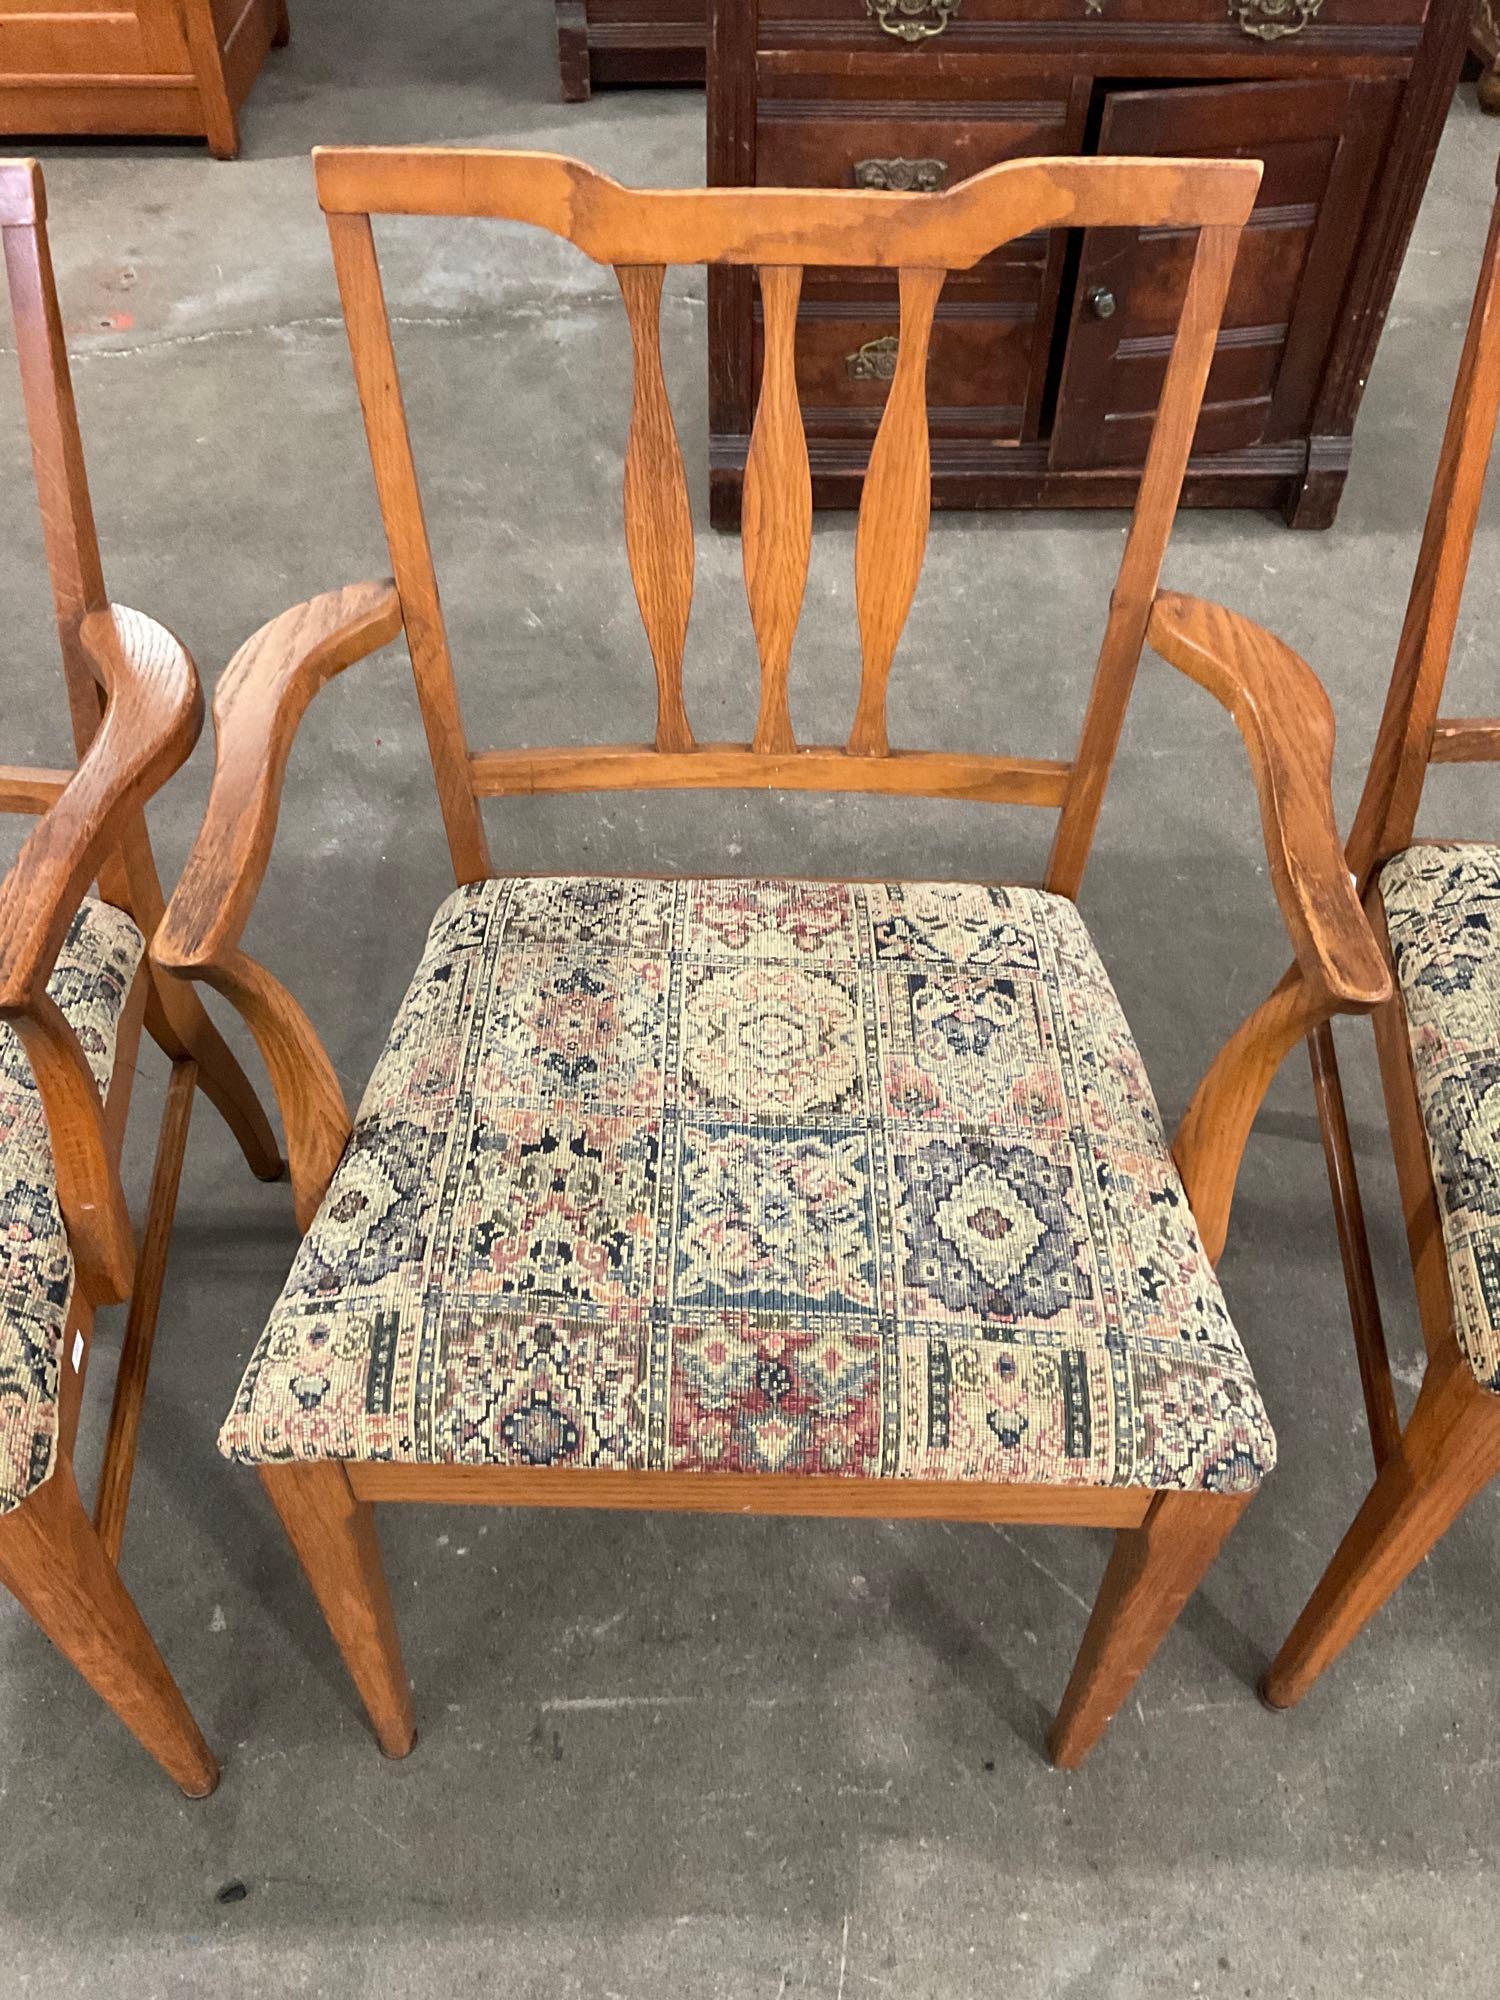 Set of 4 Oak Chairs with woven floral design seat cushions.